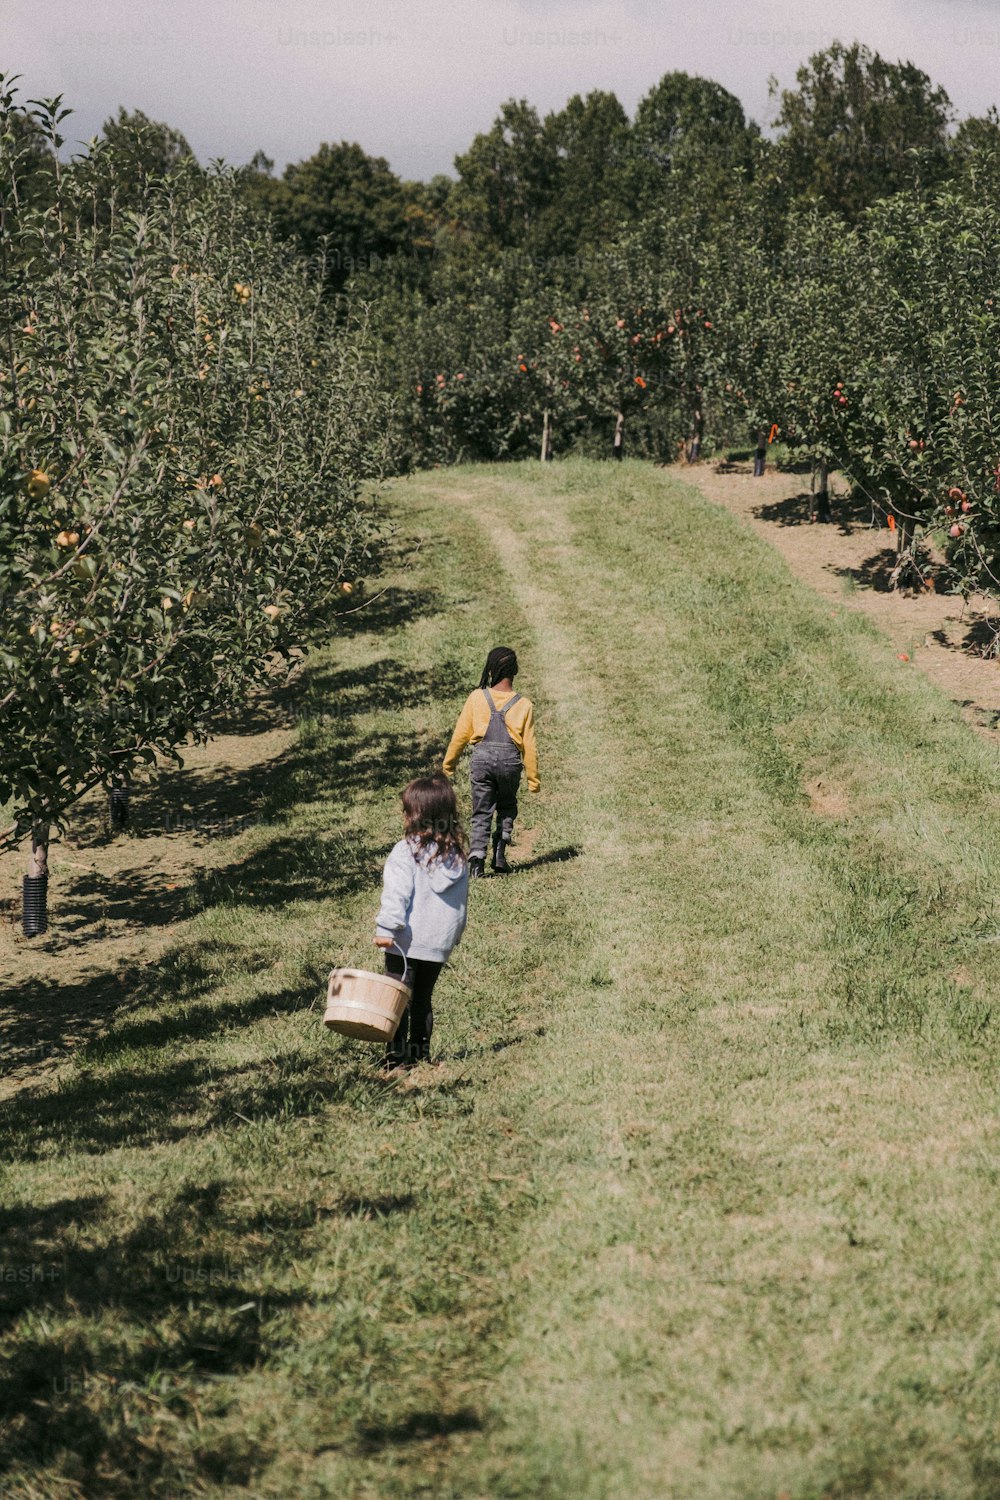 two children picking apples in an apple orchard